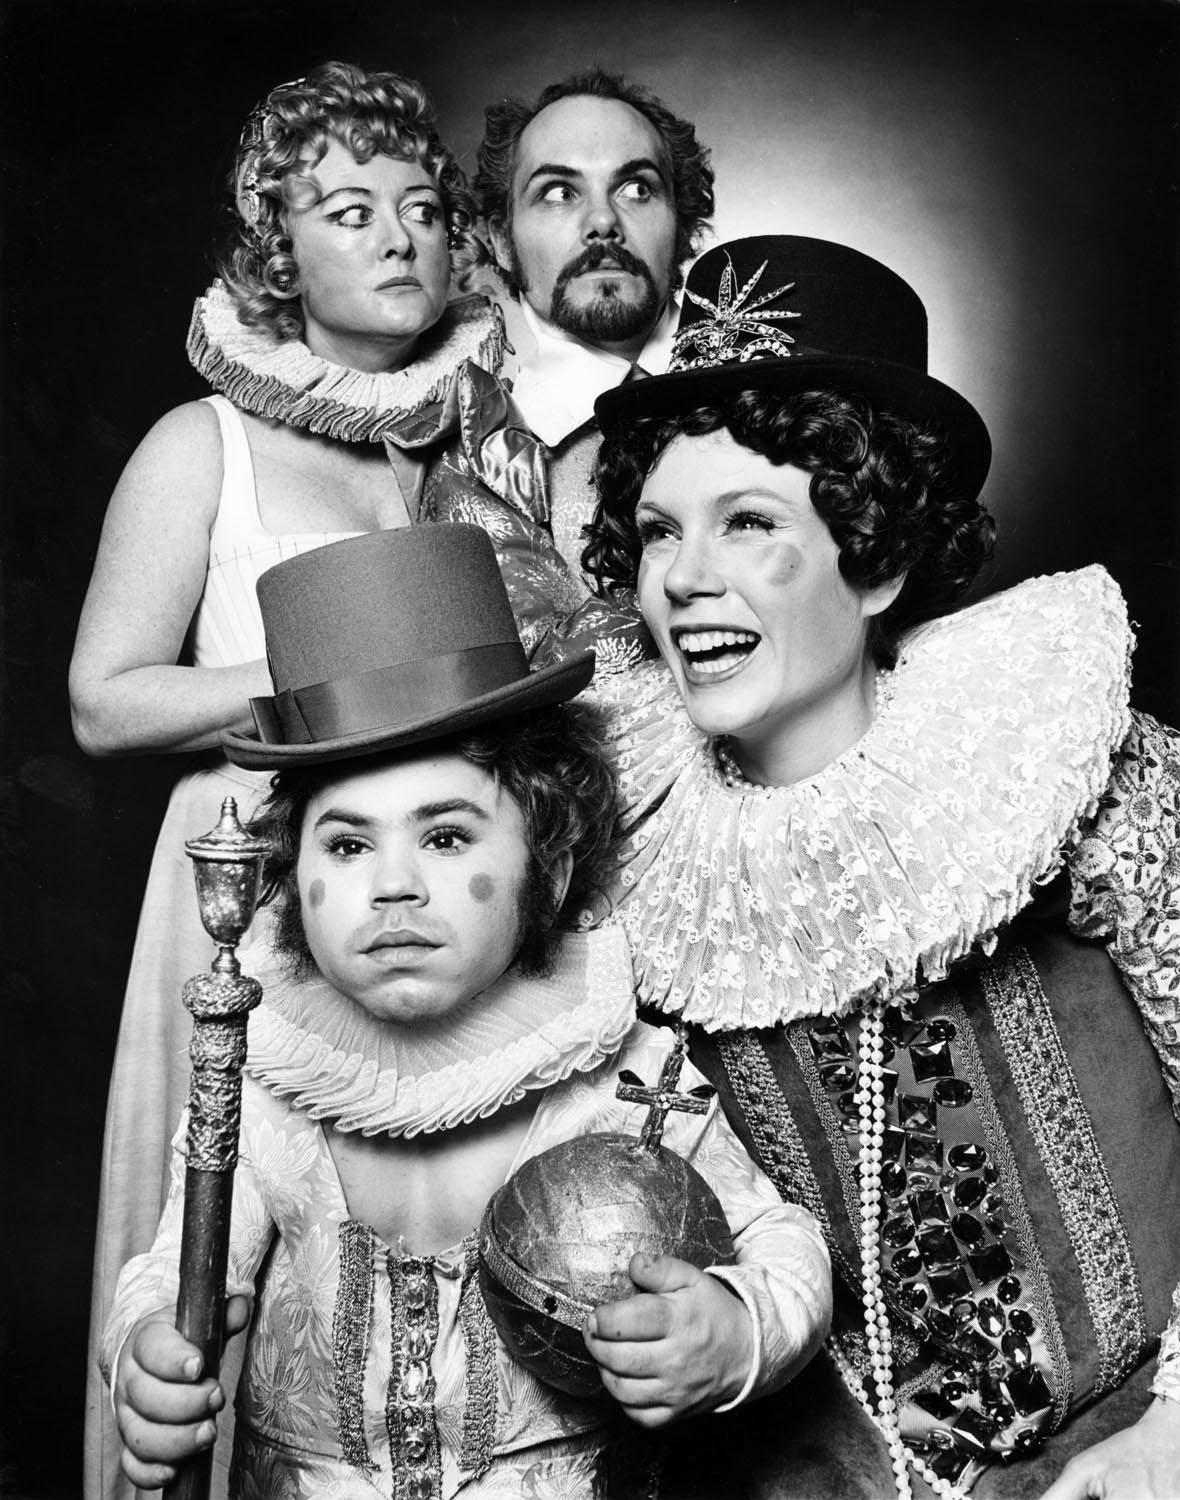 Jack Mitchell Black and White Photograph - The cast of 'Elizabeth I' on Broadway, with Ruby Lynn Reyner, Hervé Villechaize